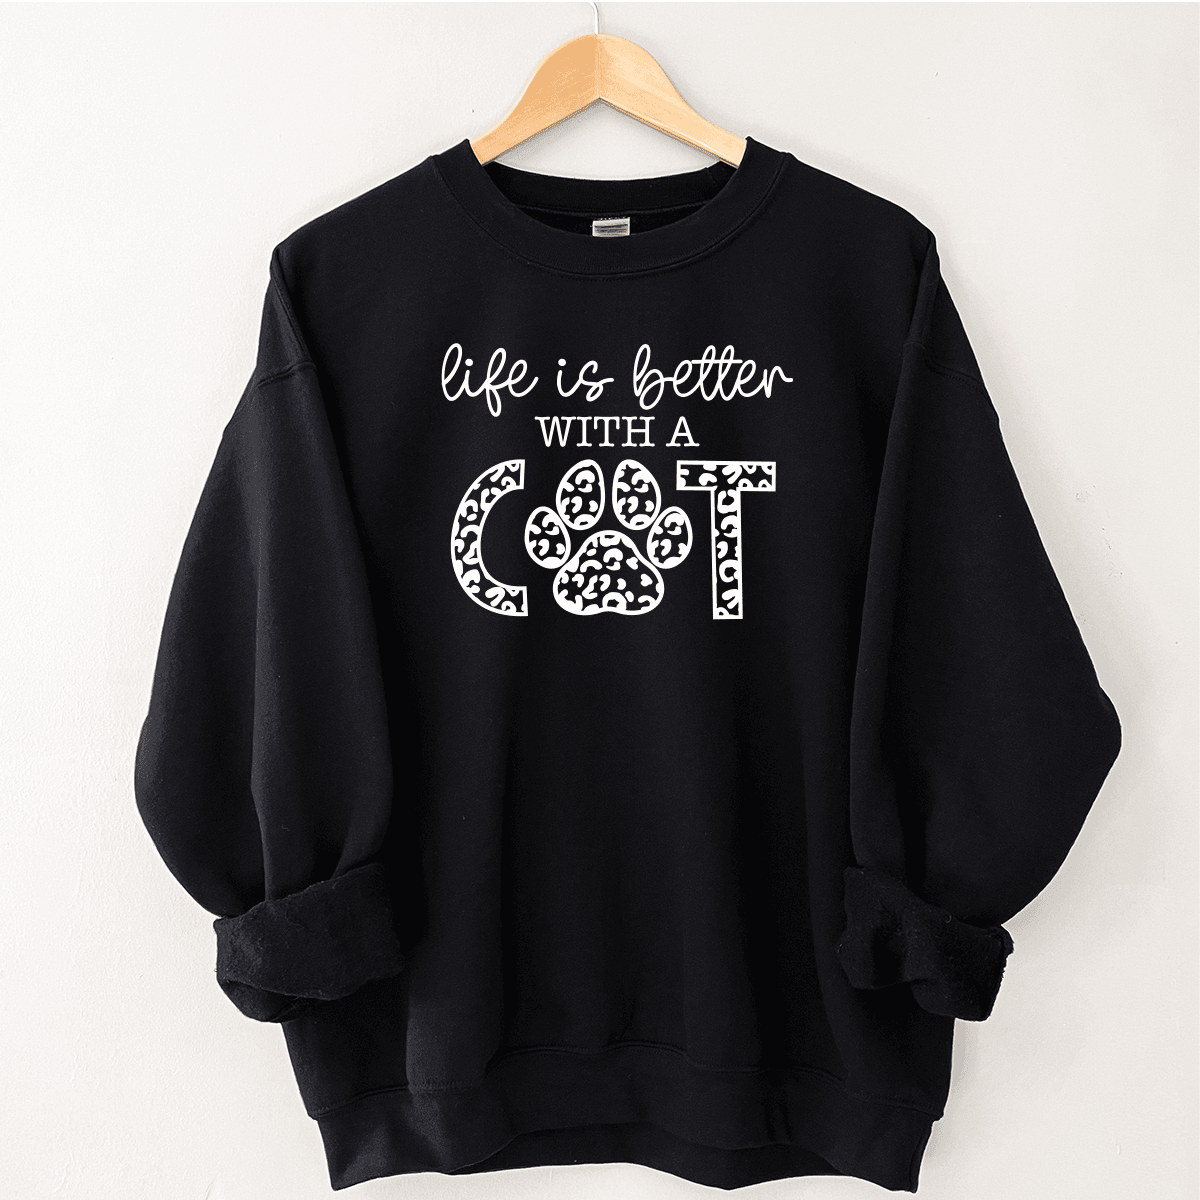 Life Is Better With A Cat - Sweatshirt